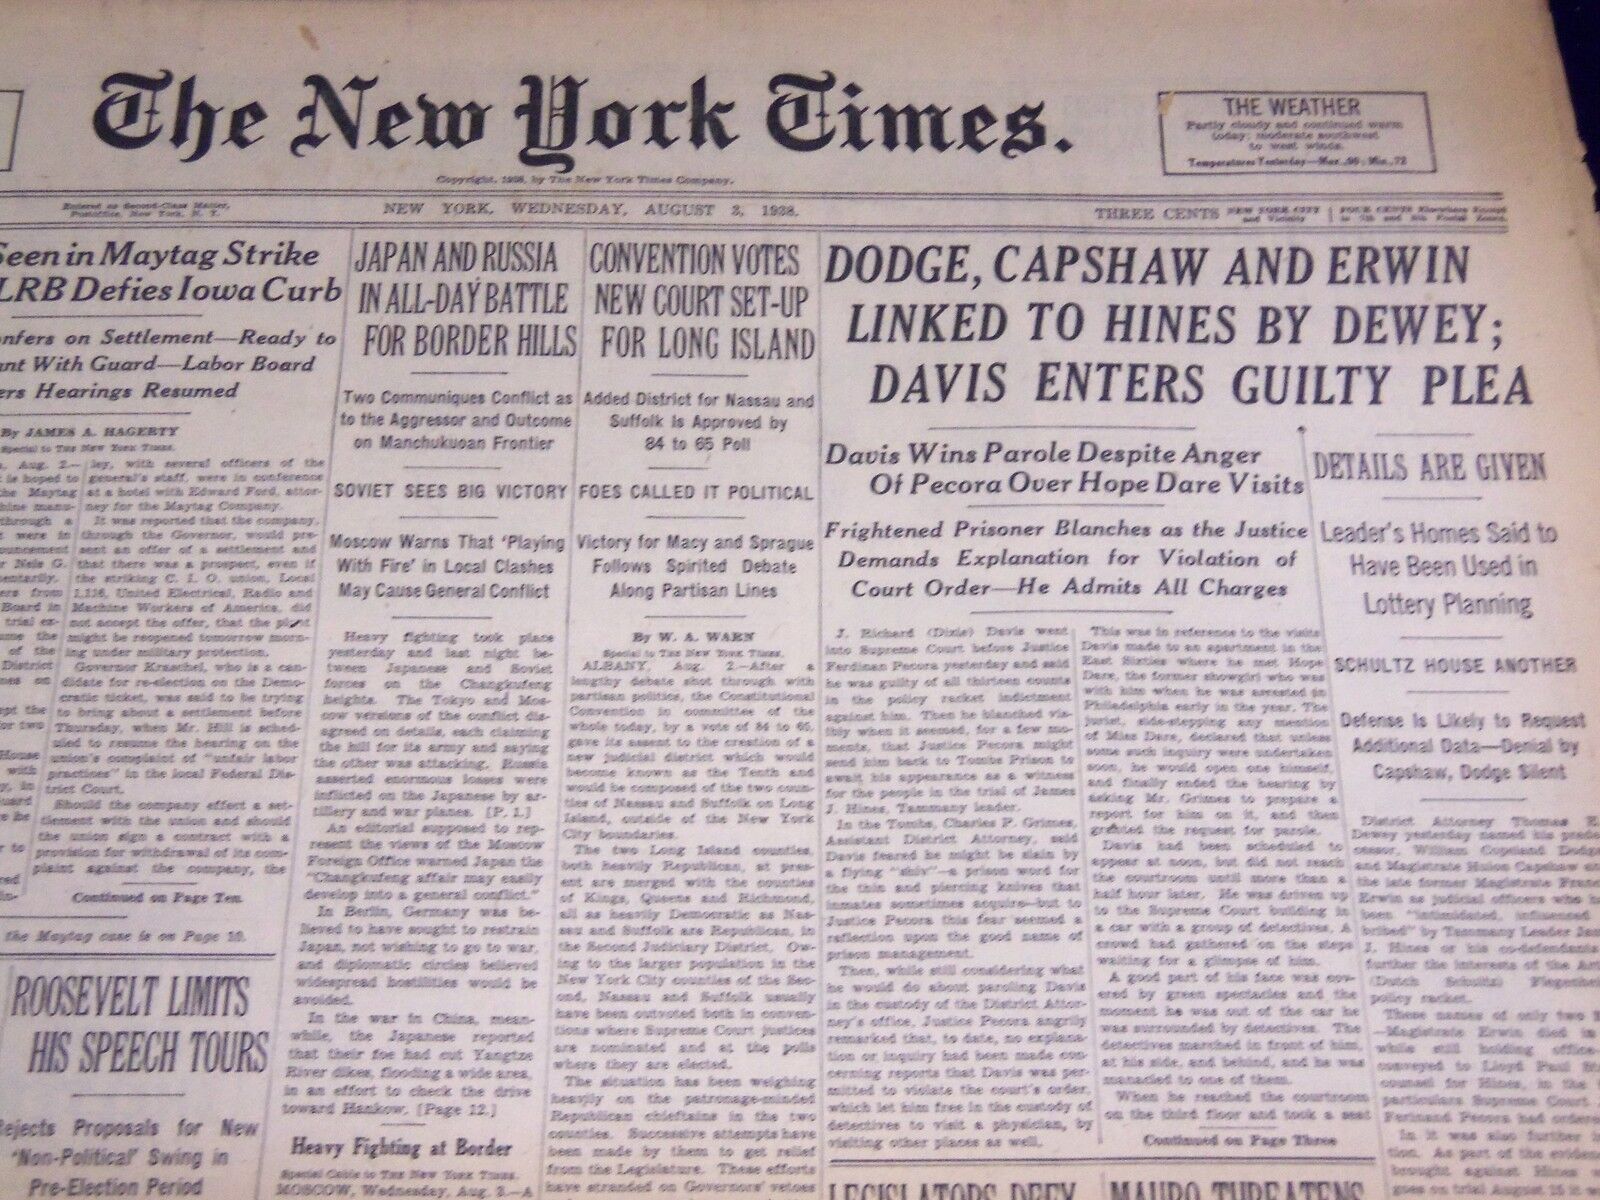 1938 AUGUST 3 NEW YORK TIMES - DODGE CAPSHAW & ERWIN LINKED TO HINES - NT 2867